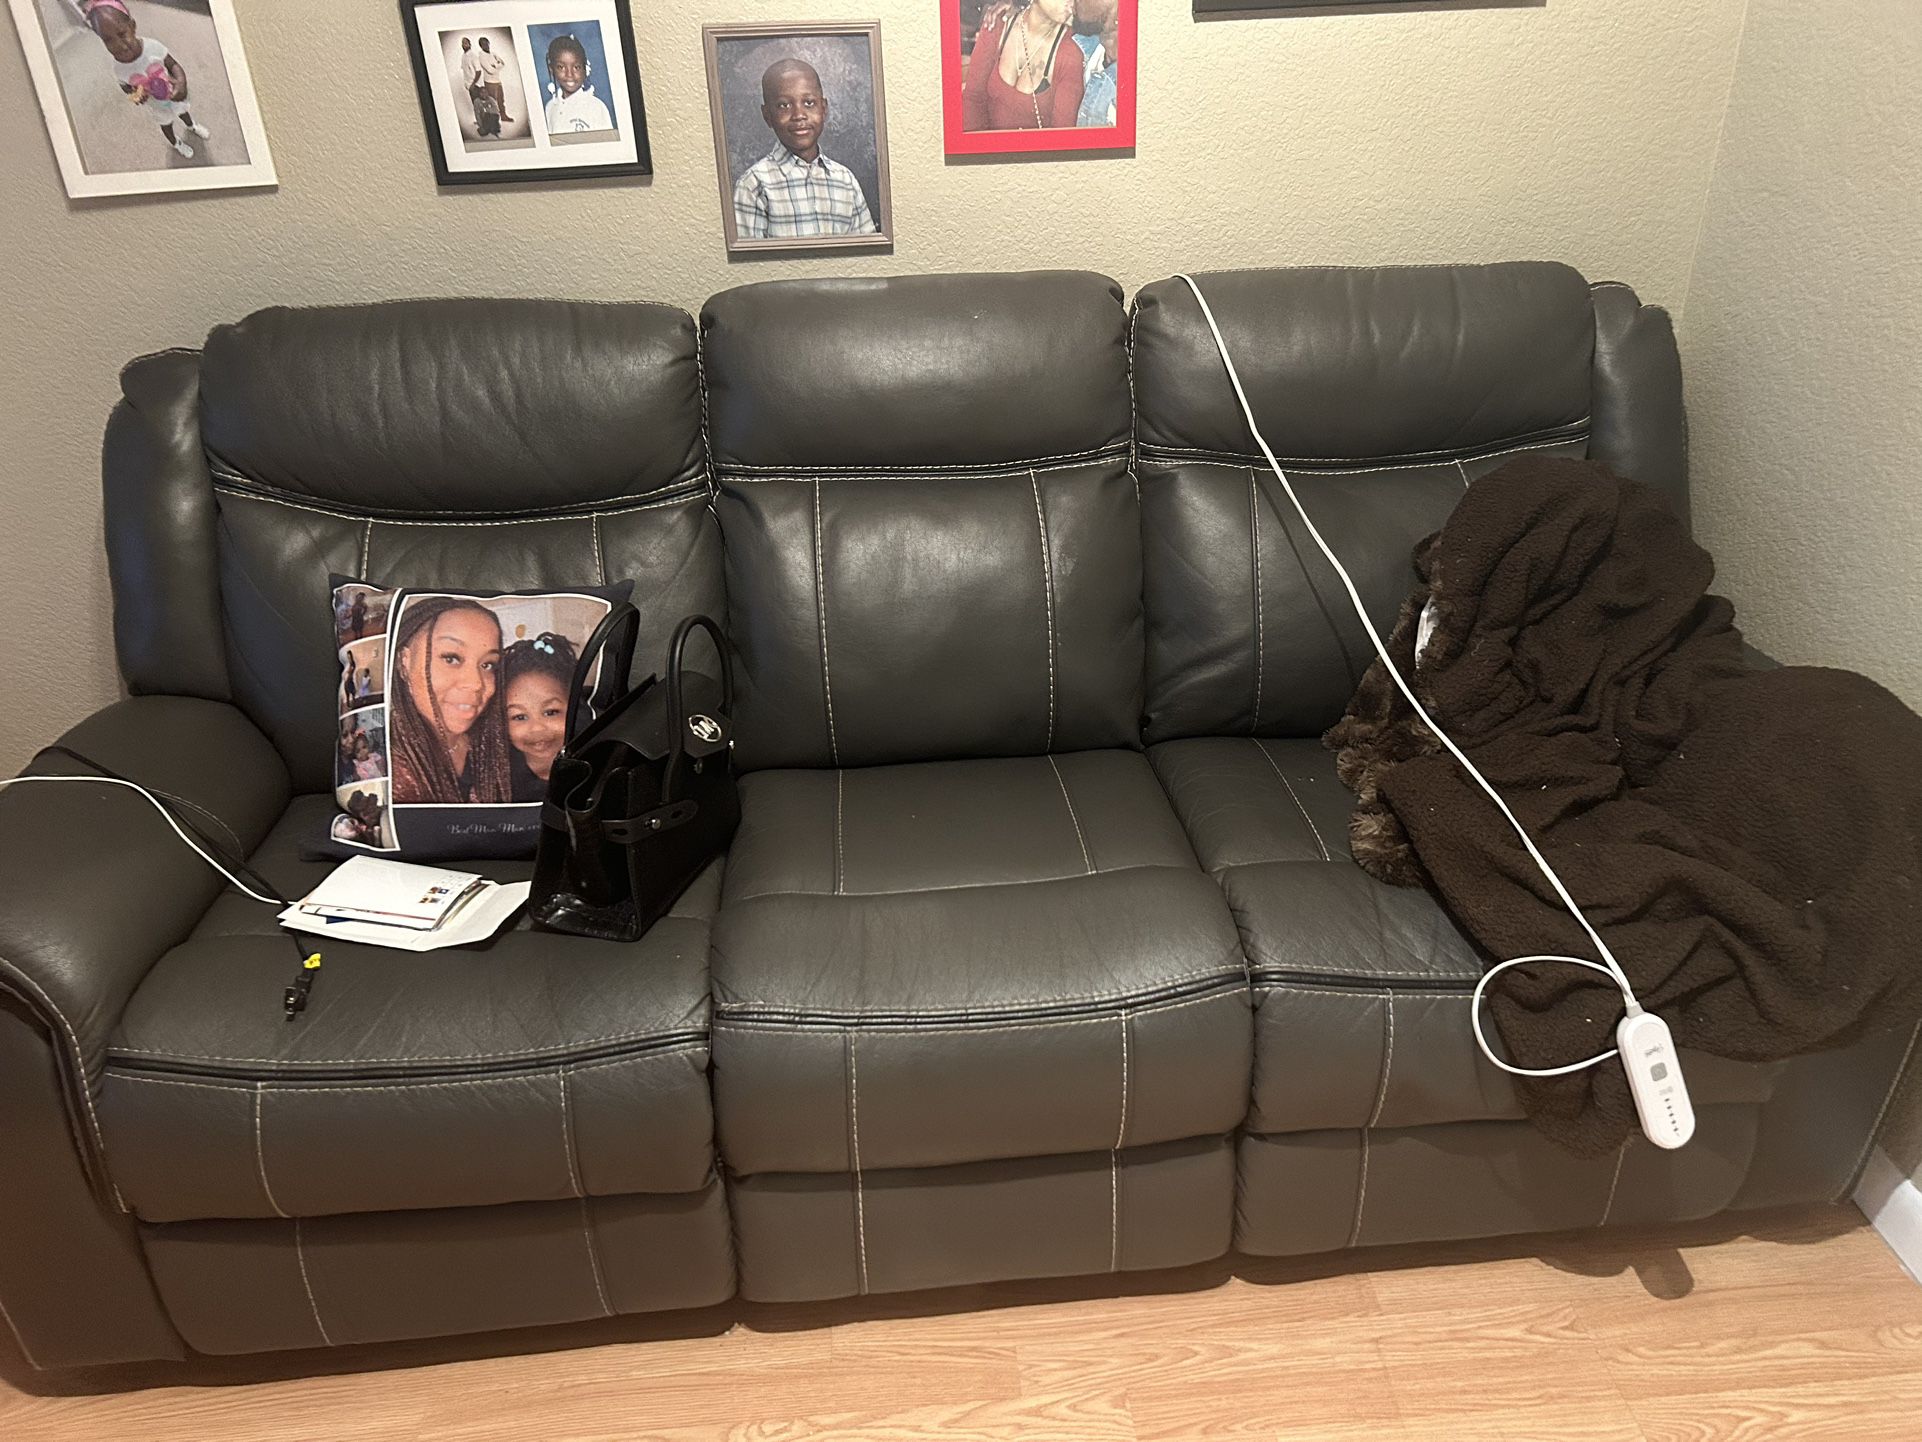 A Recliner Couch For Sale